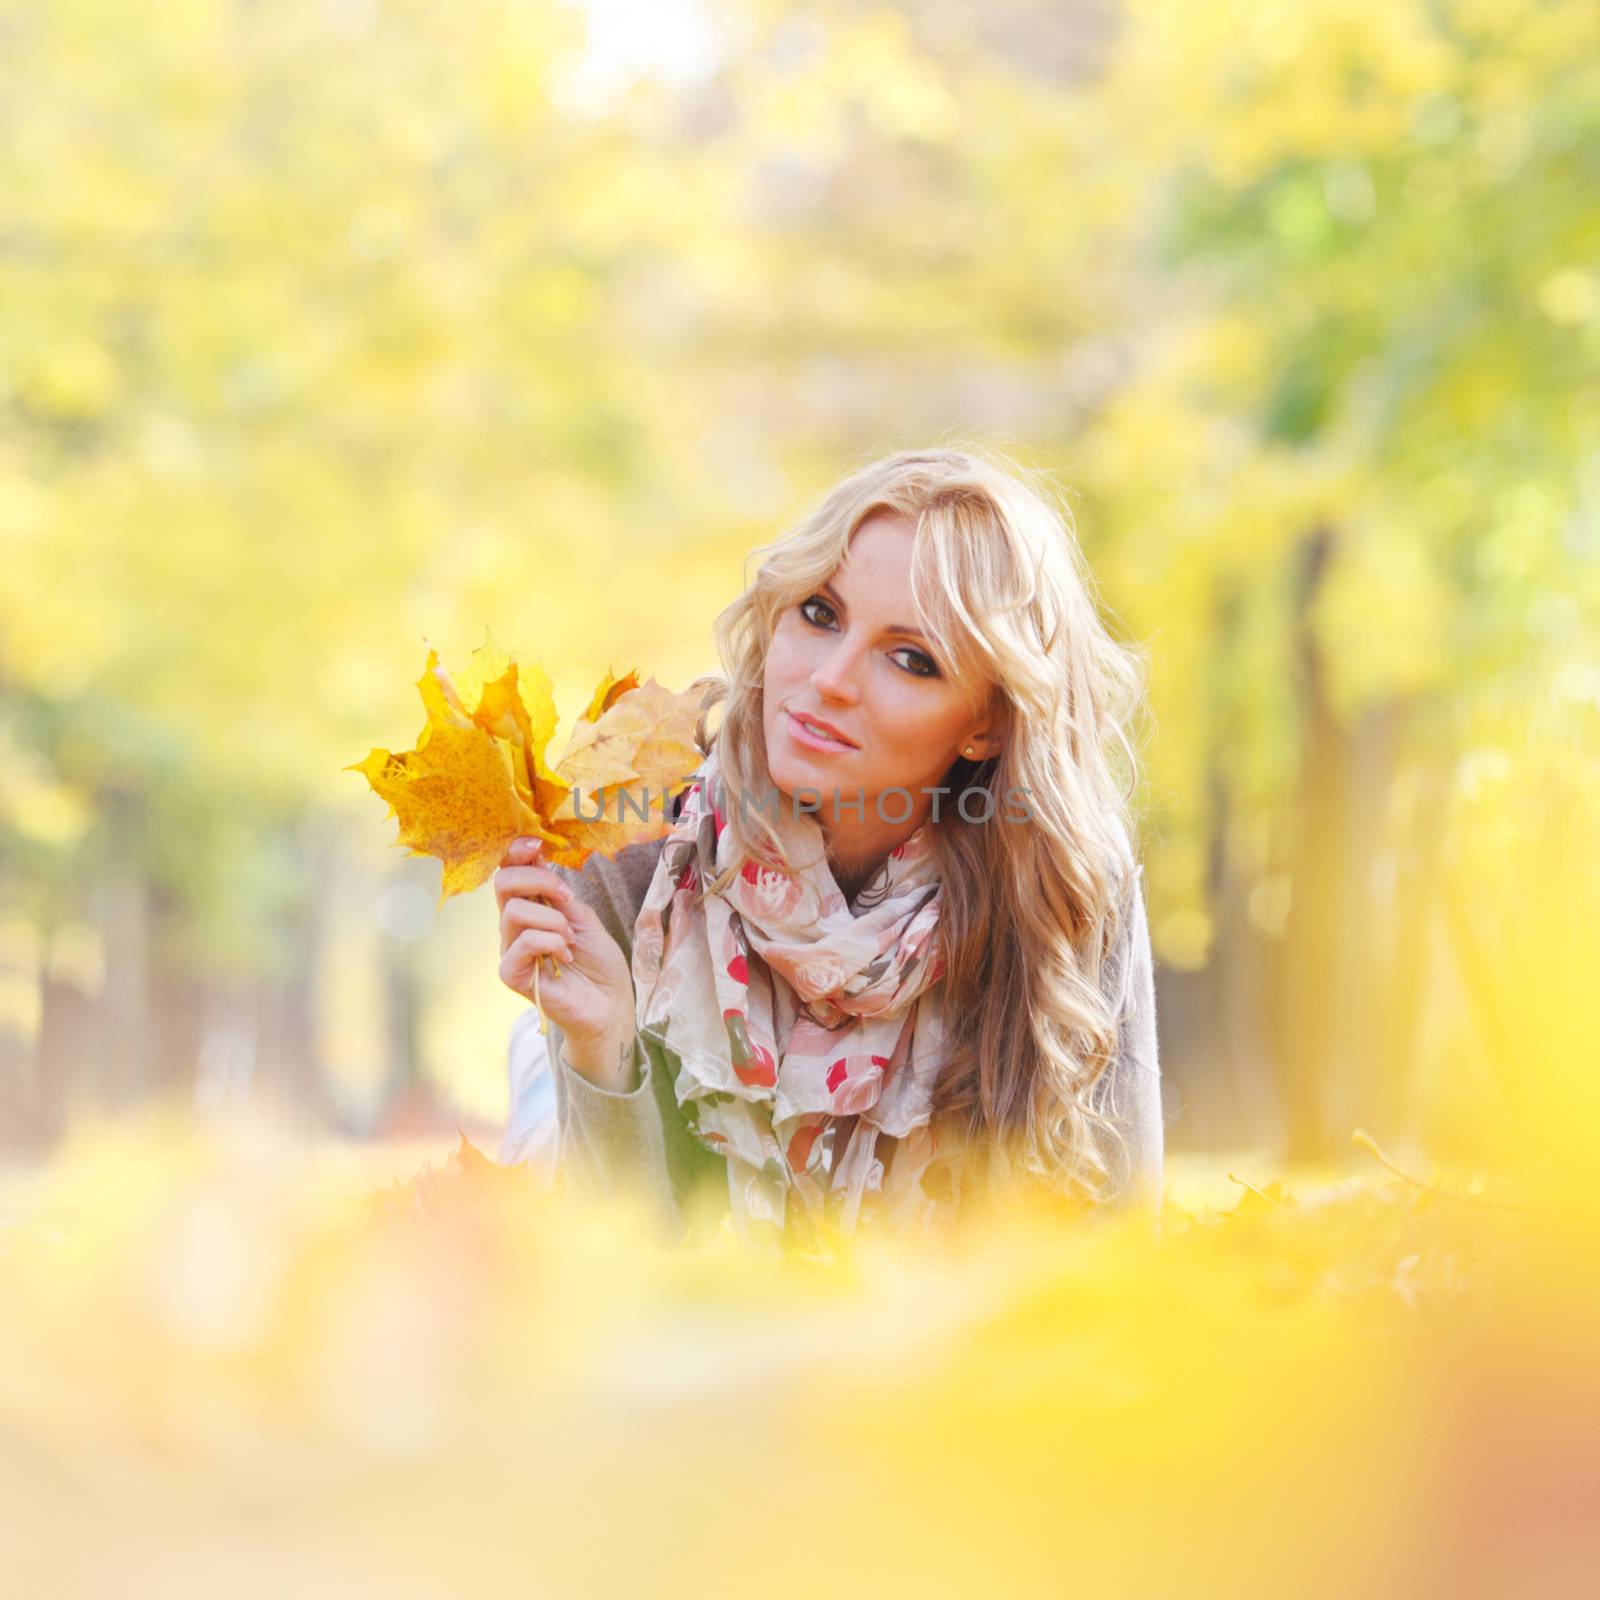 Portrait of a cute smiling woman lying in autumn leaves in park